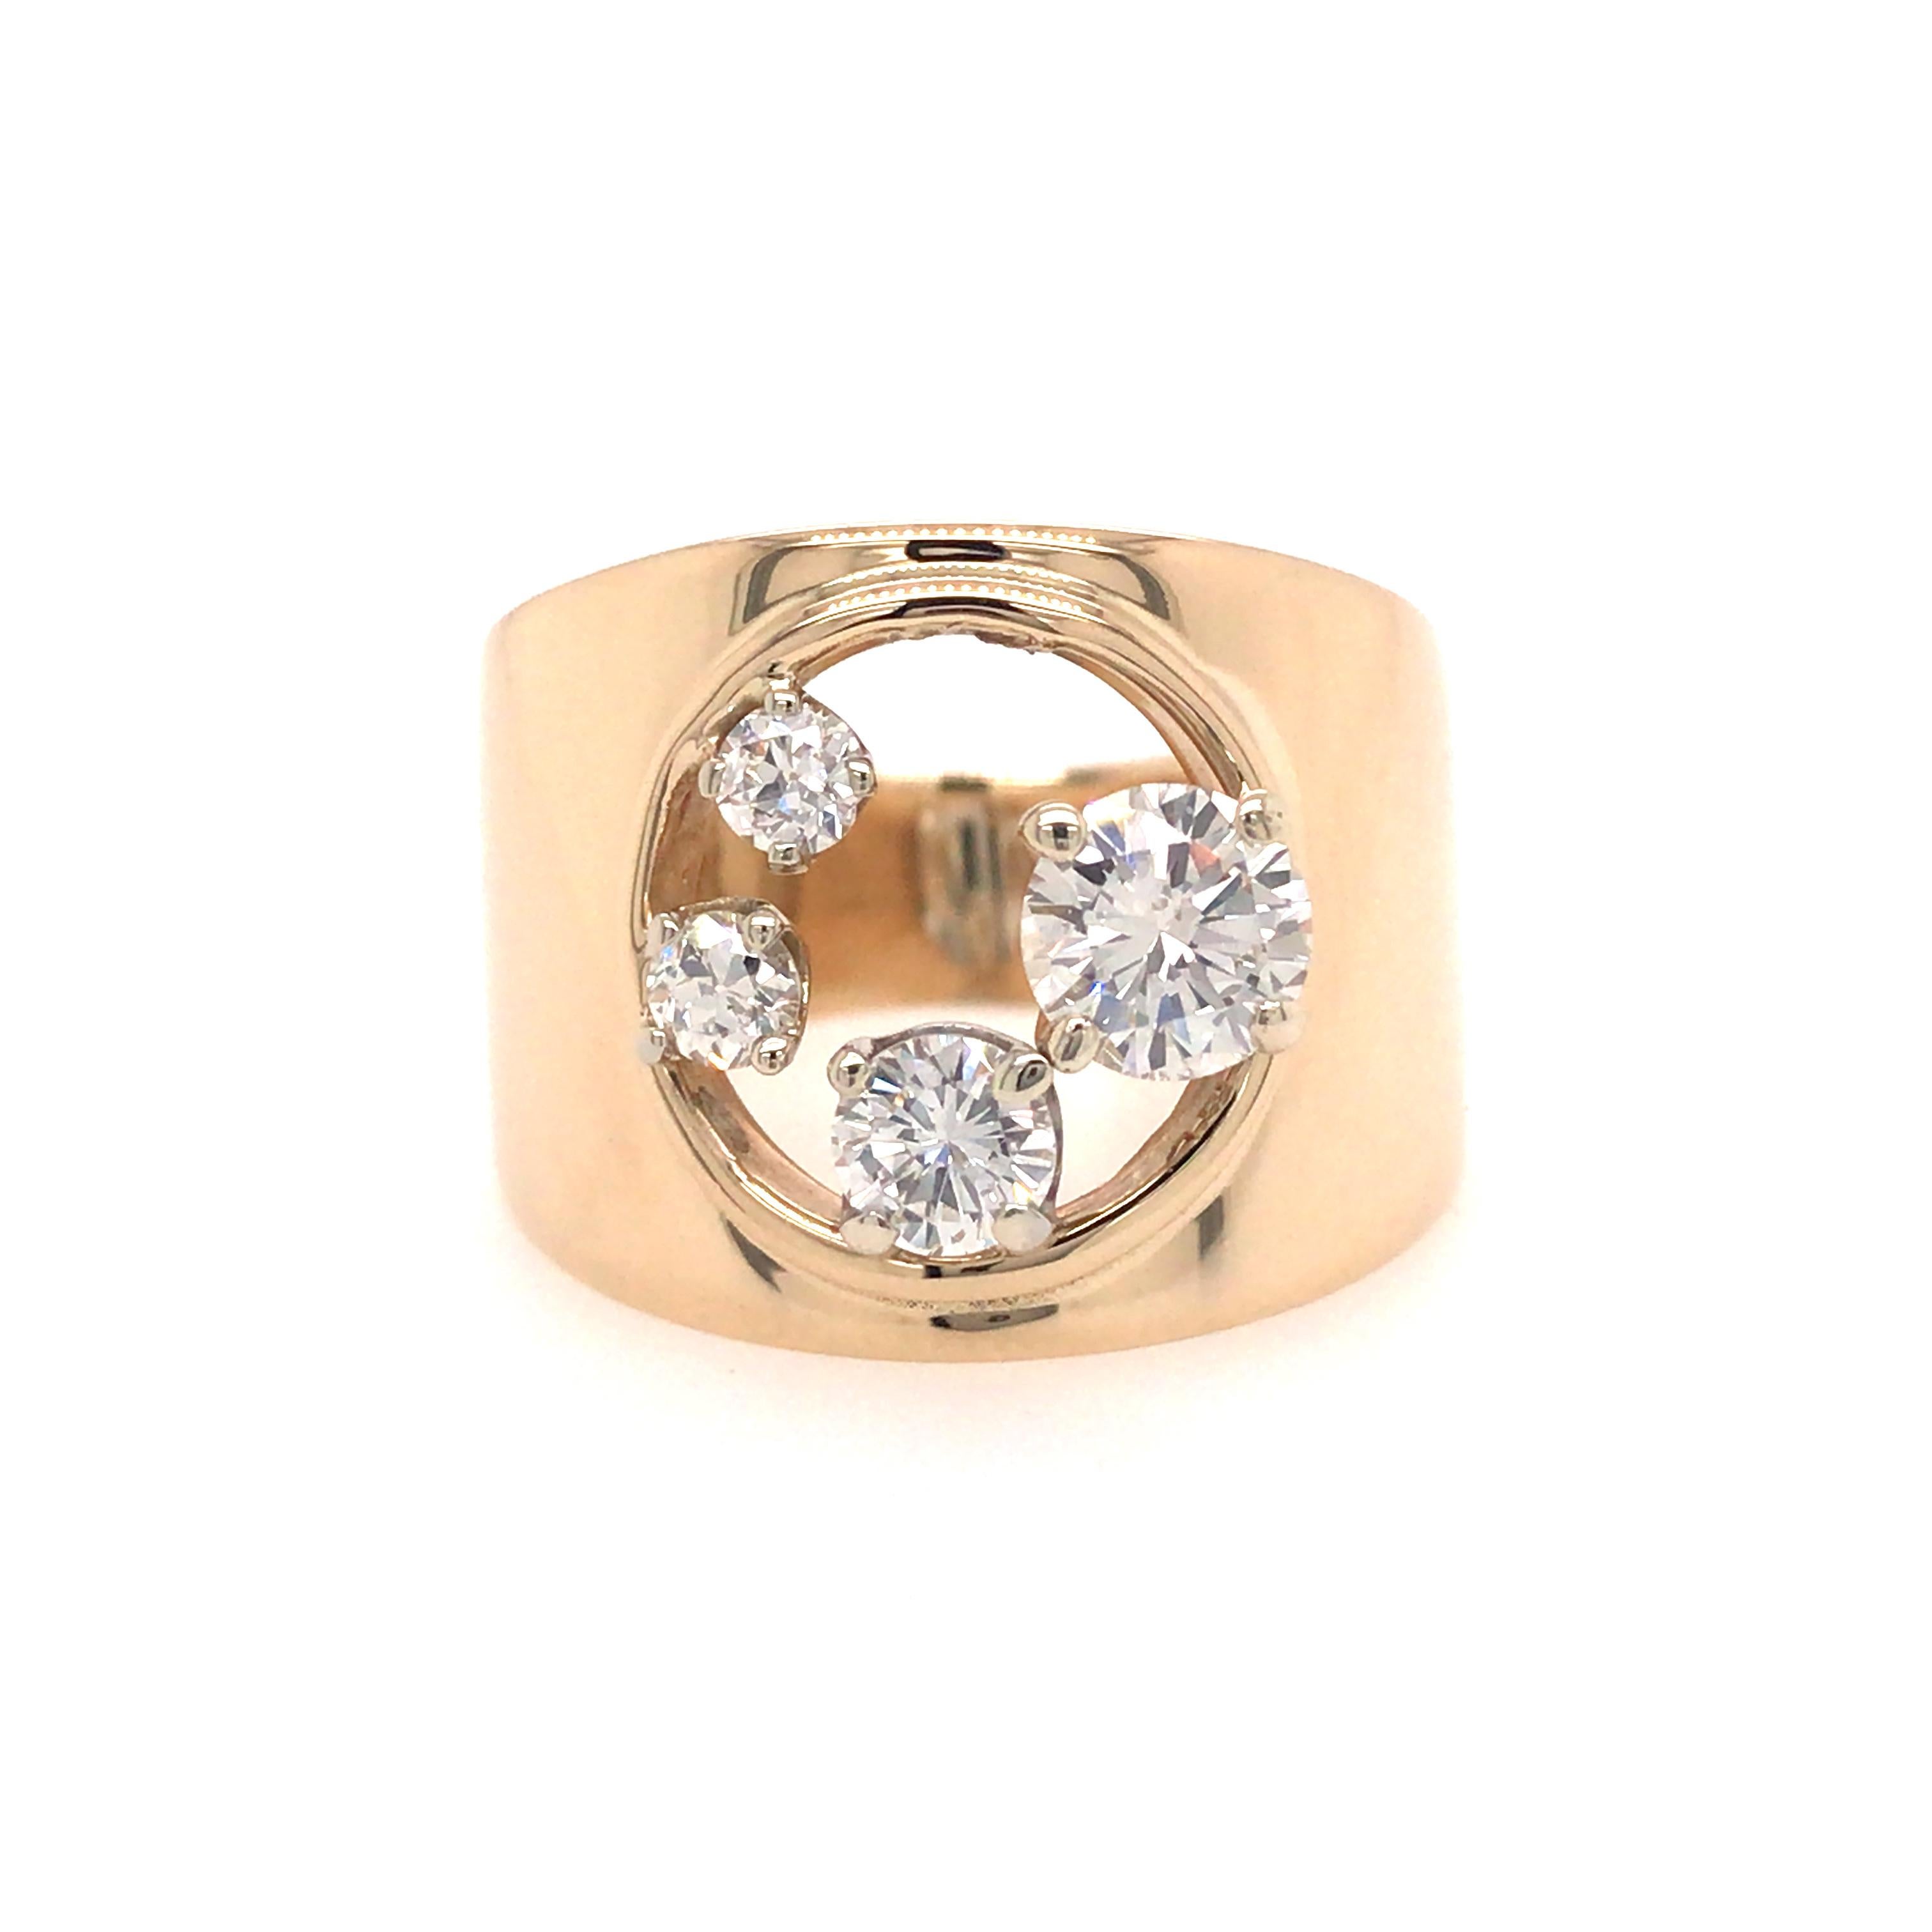 Open Space Diamond Band in 14K Yellow Gold.  (4) Round Brilliant Cut Diamonds weighing 1.10 carat total weight G-H in color and VS-SI in clarity are expertly set.  The Ring measures 5/8 inch in width at the widest point.  Ring size 7. 10.26 grams.